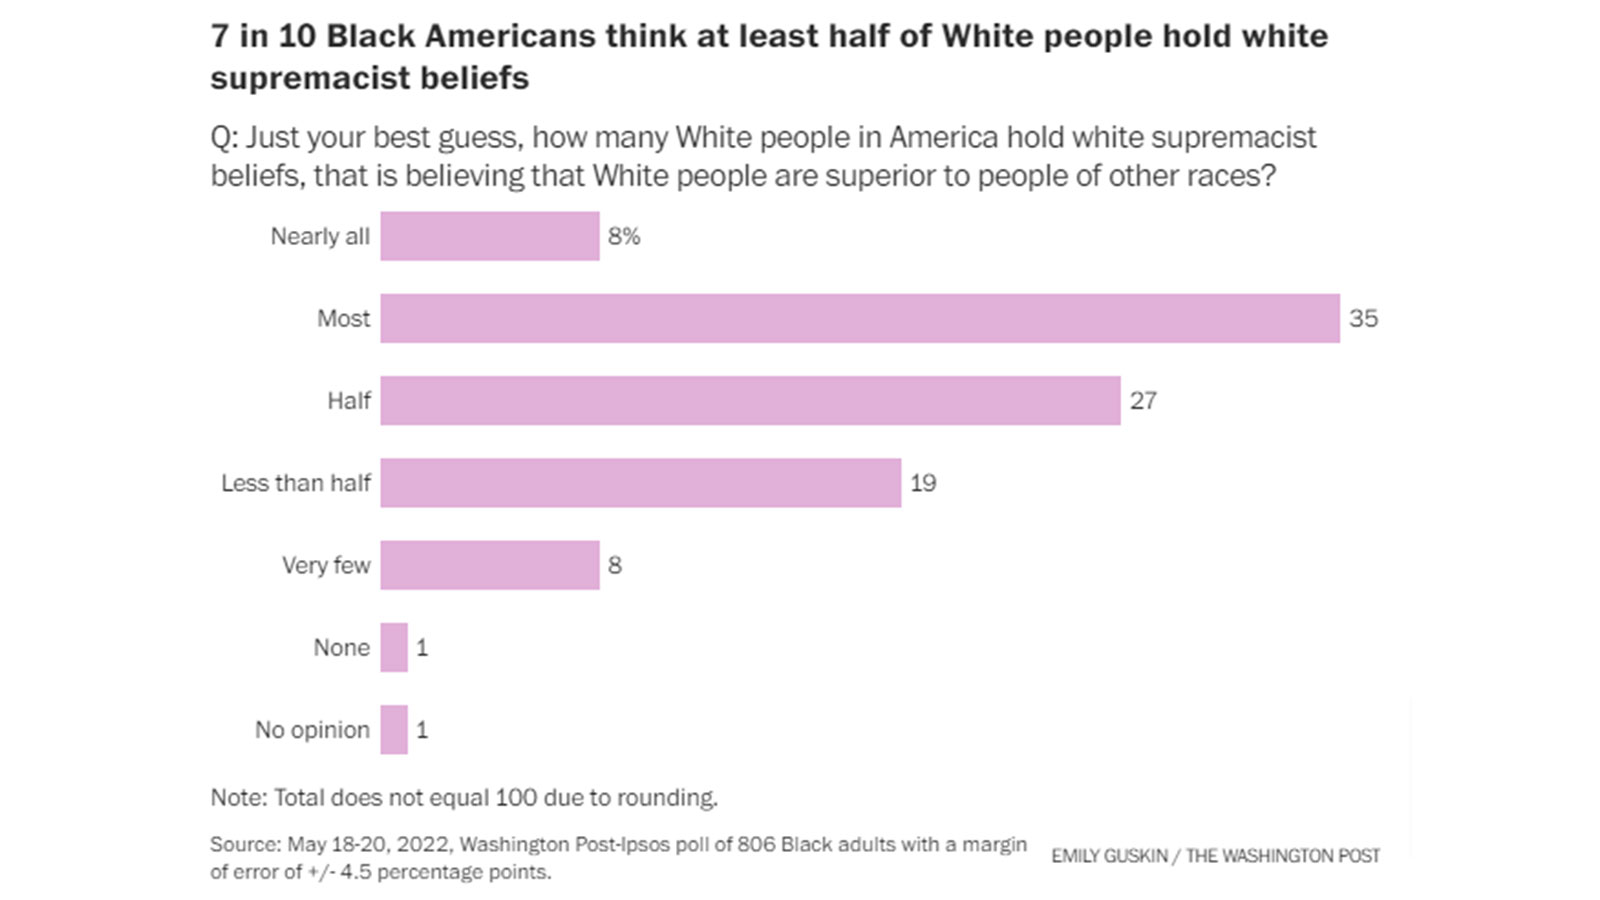 Q: Just your best guess, how many White people in America hold white supremacist beliefs, that is believing that White people are superior to people of other races?